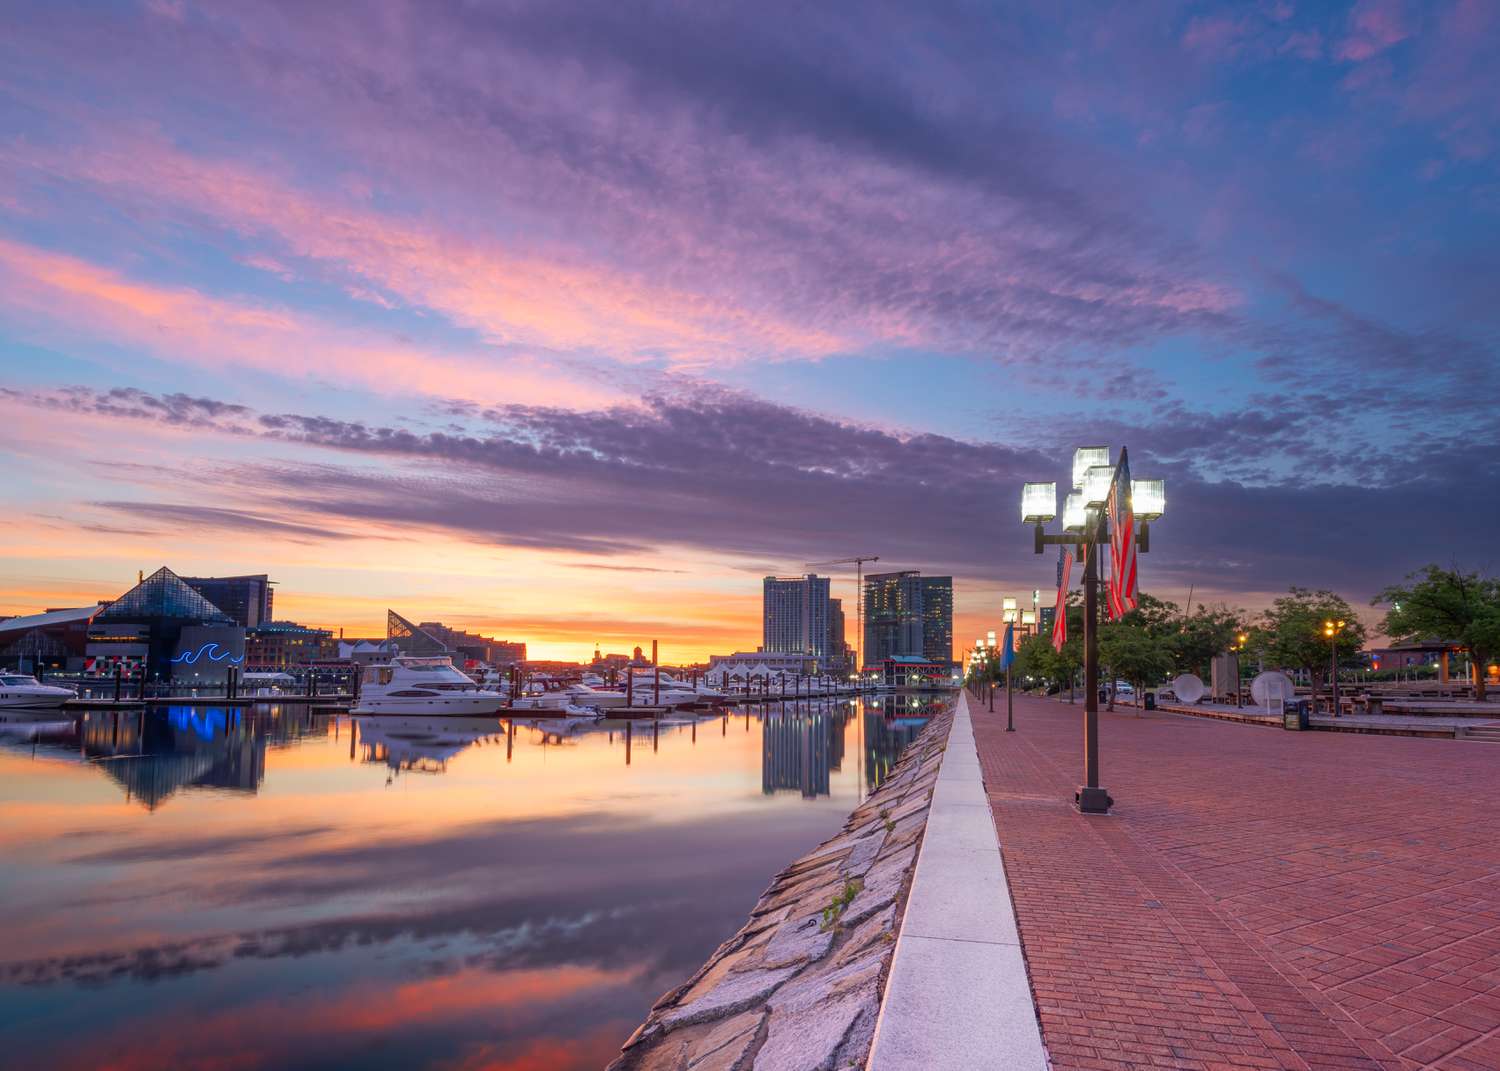 This Maryland City Is An Ideal Weekend Escape On The East Coast